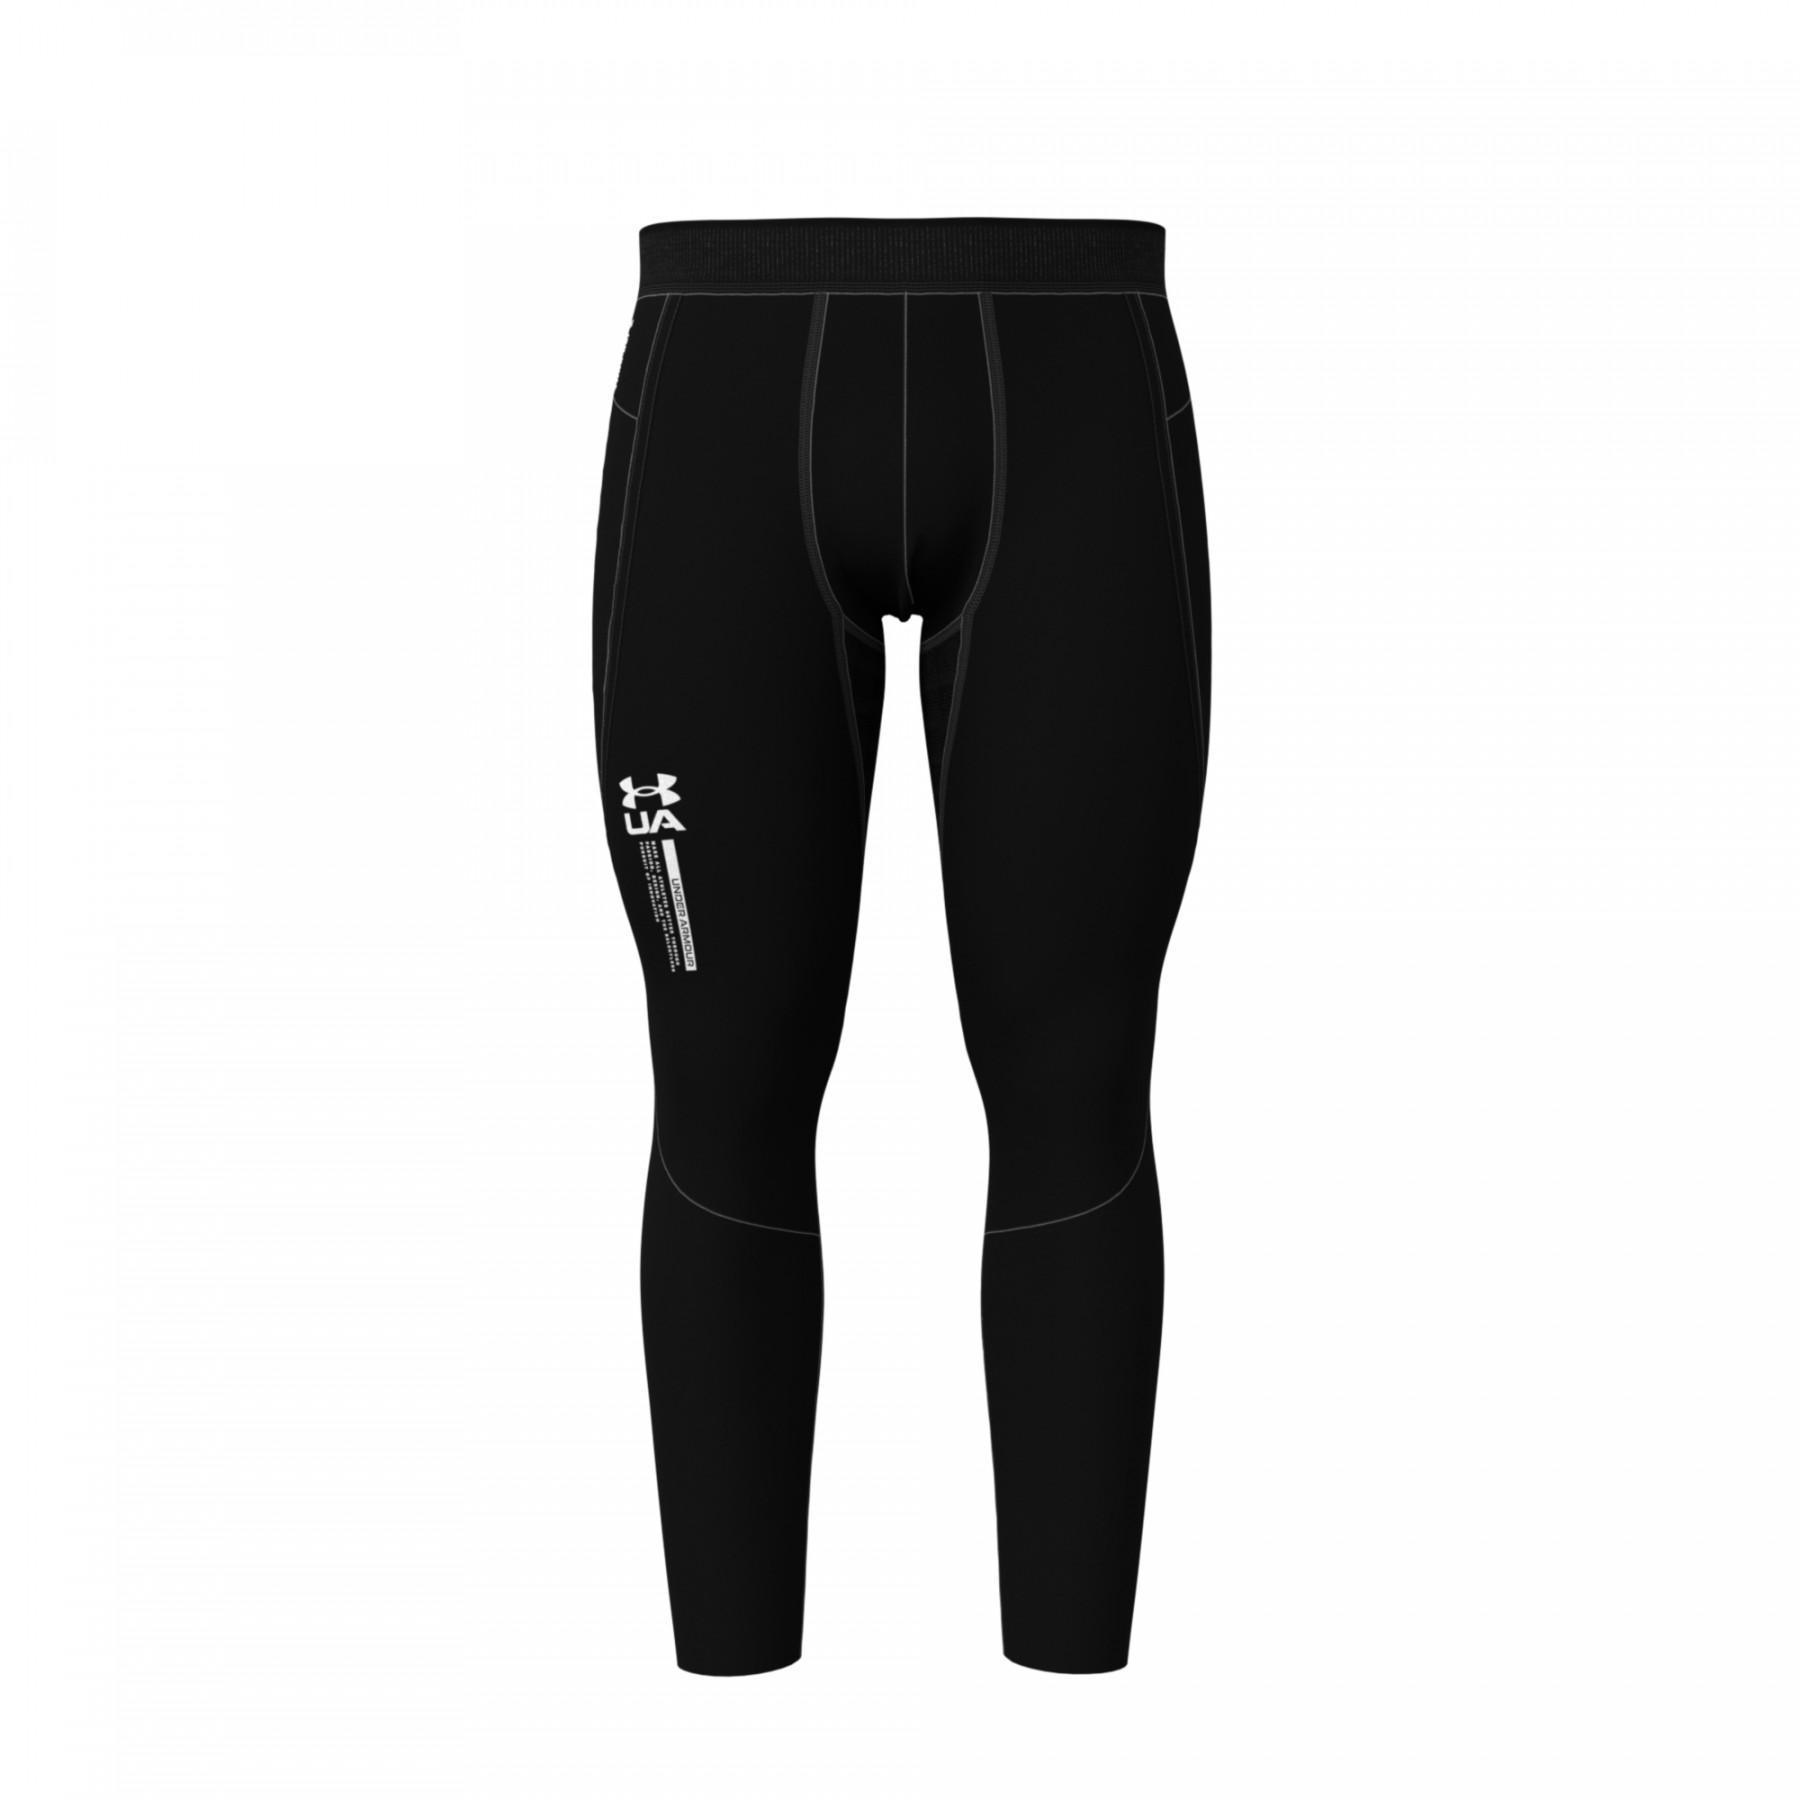 Legging Under Armour perforé iso-chill